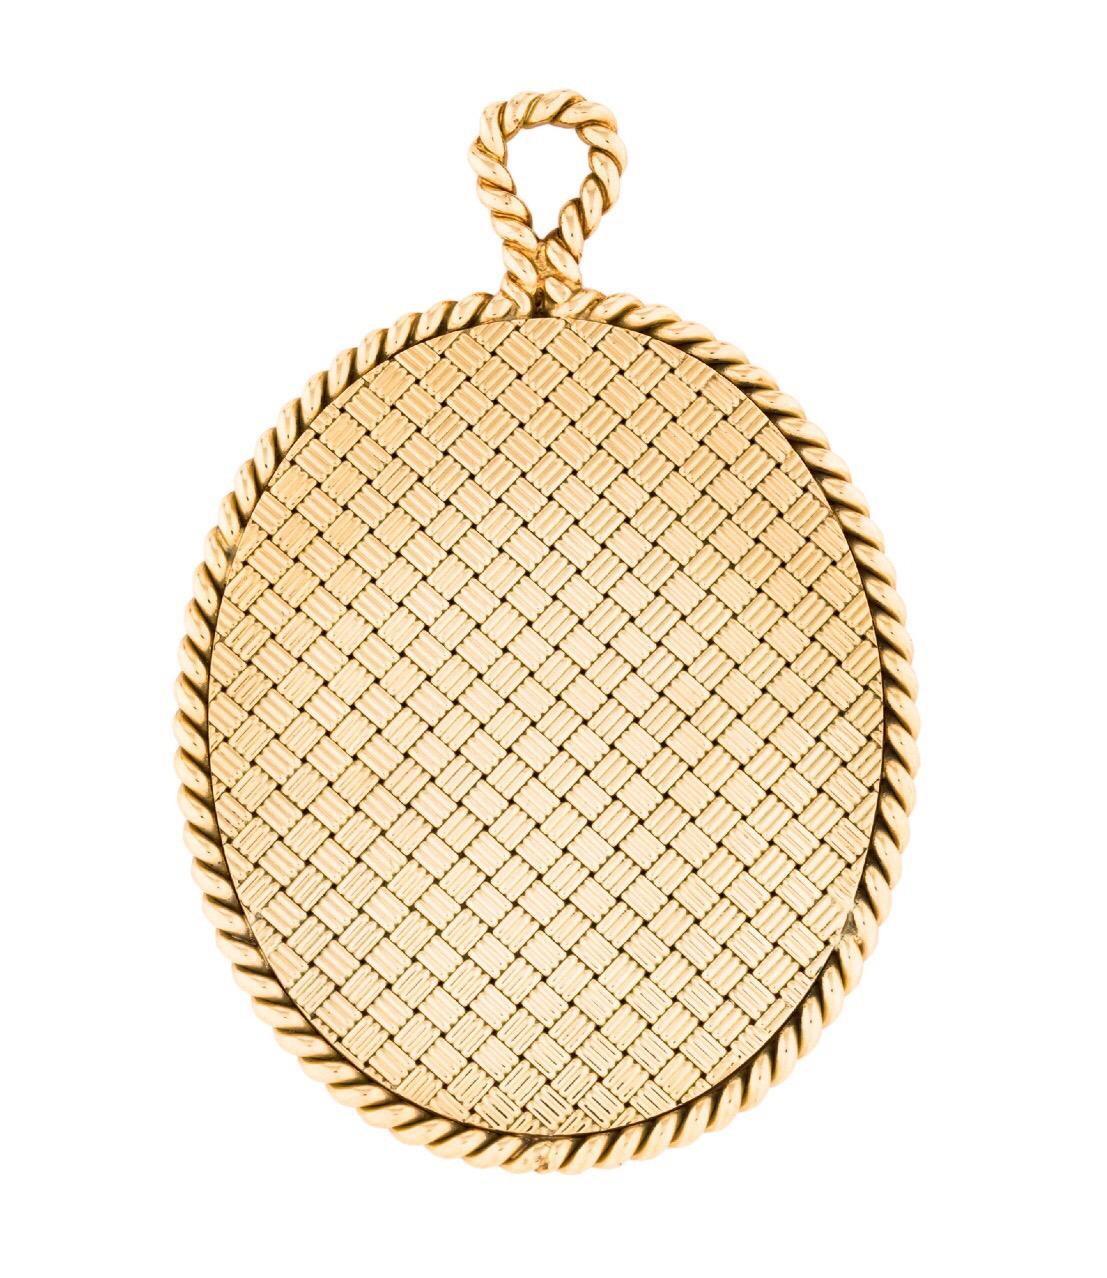 Tiffany & Co. 14 Karat Yellow Gold Mirror Pendant 

This is a very rare and highly collectable vintage Tiffany & Co. mirror pendant. The piece features an intricate interlocking motif surround by a rope design on the back in amazing detail. The